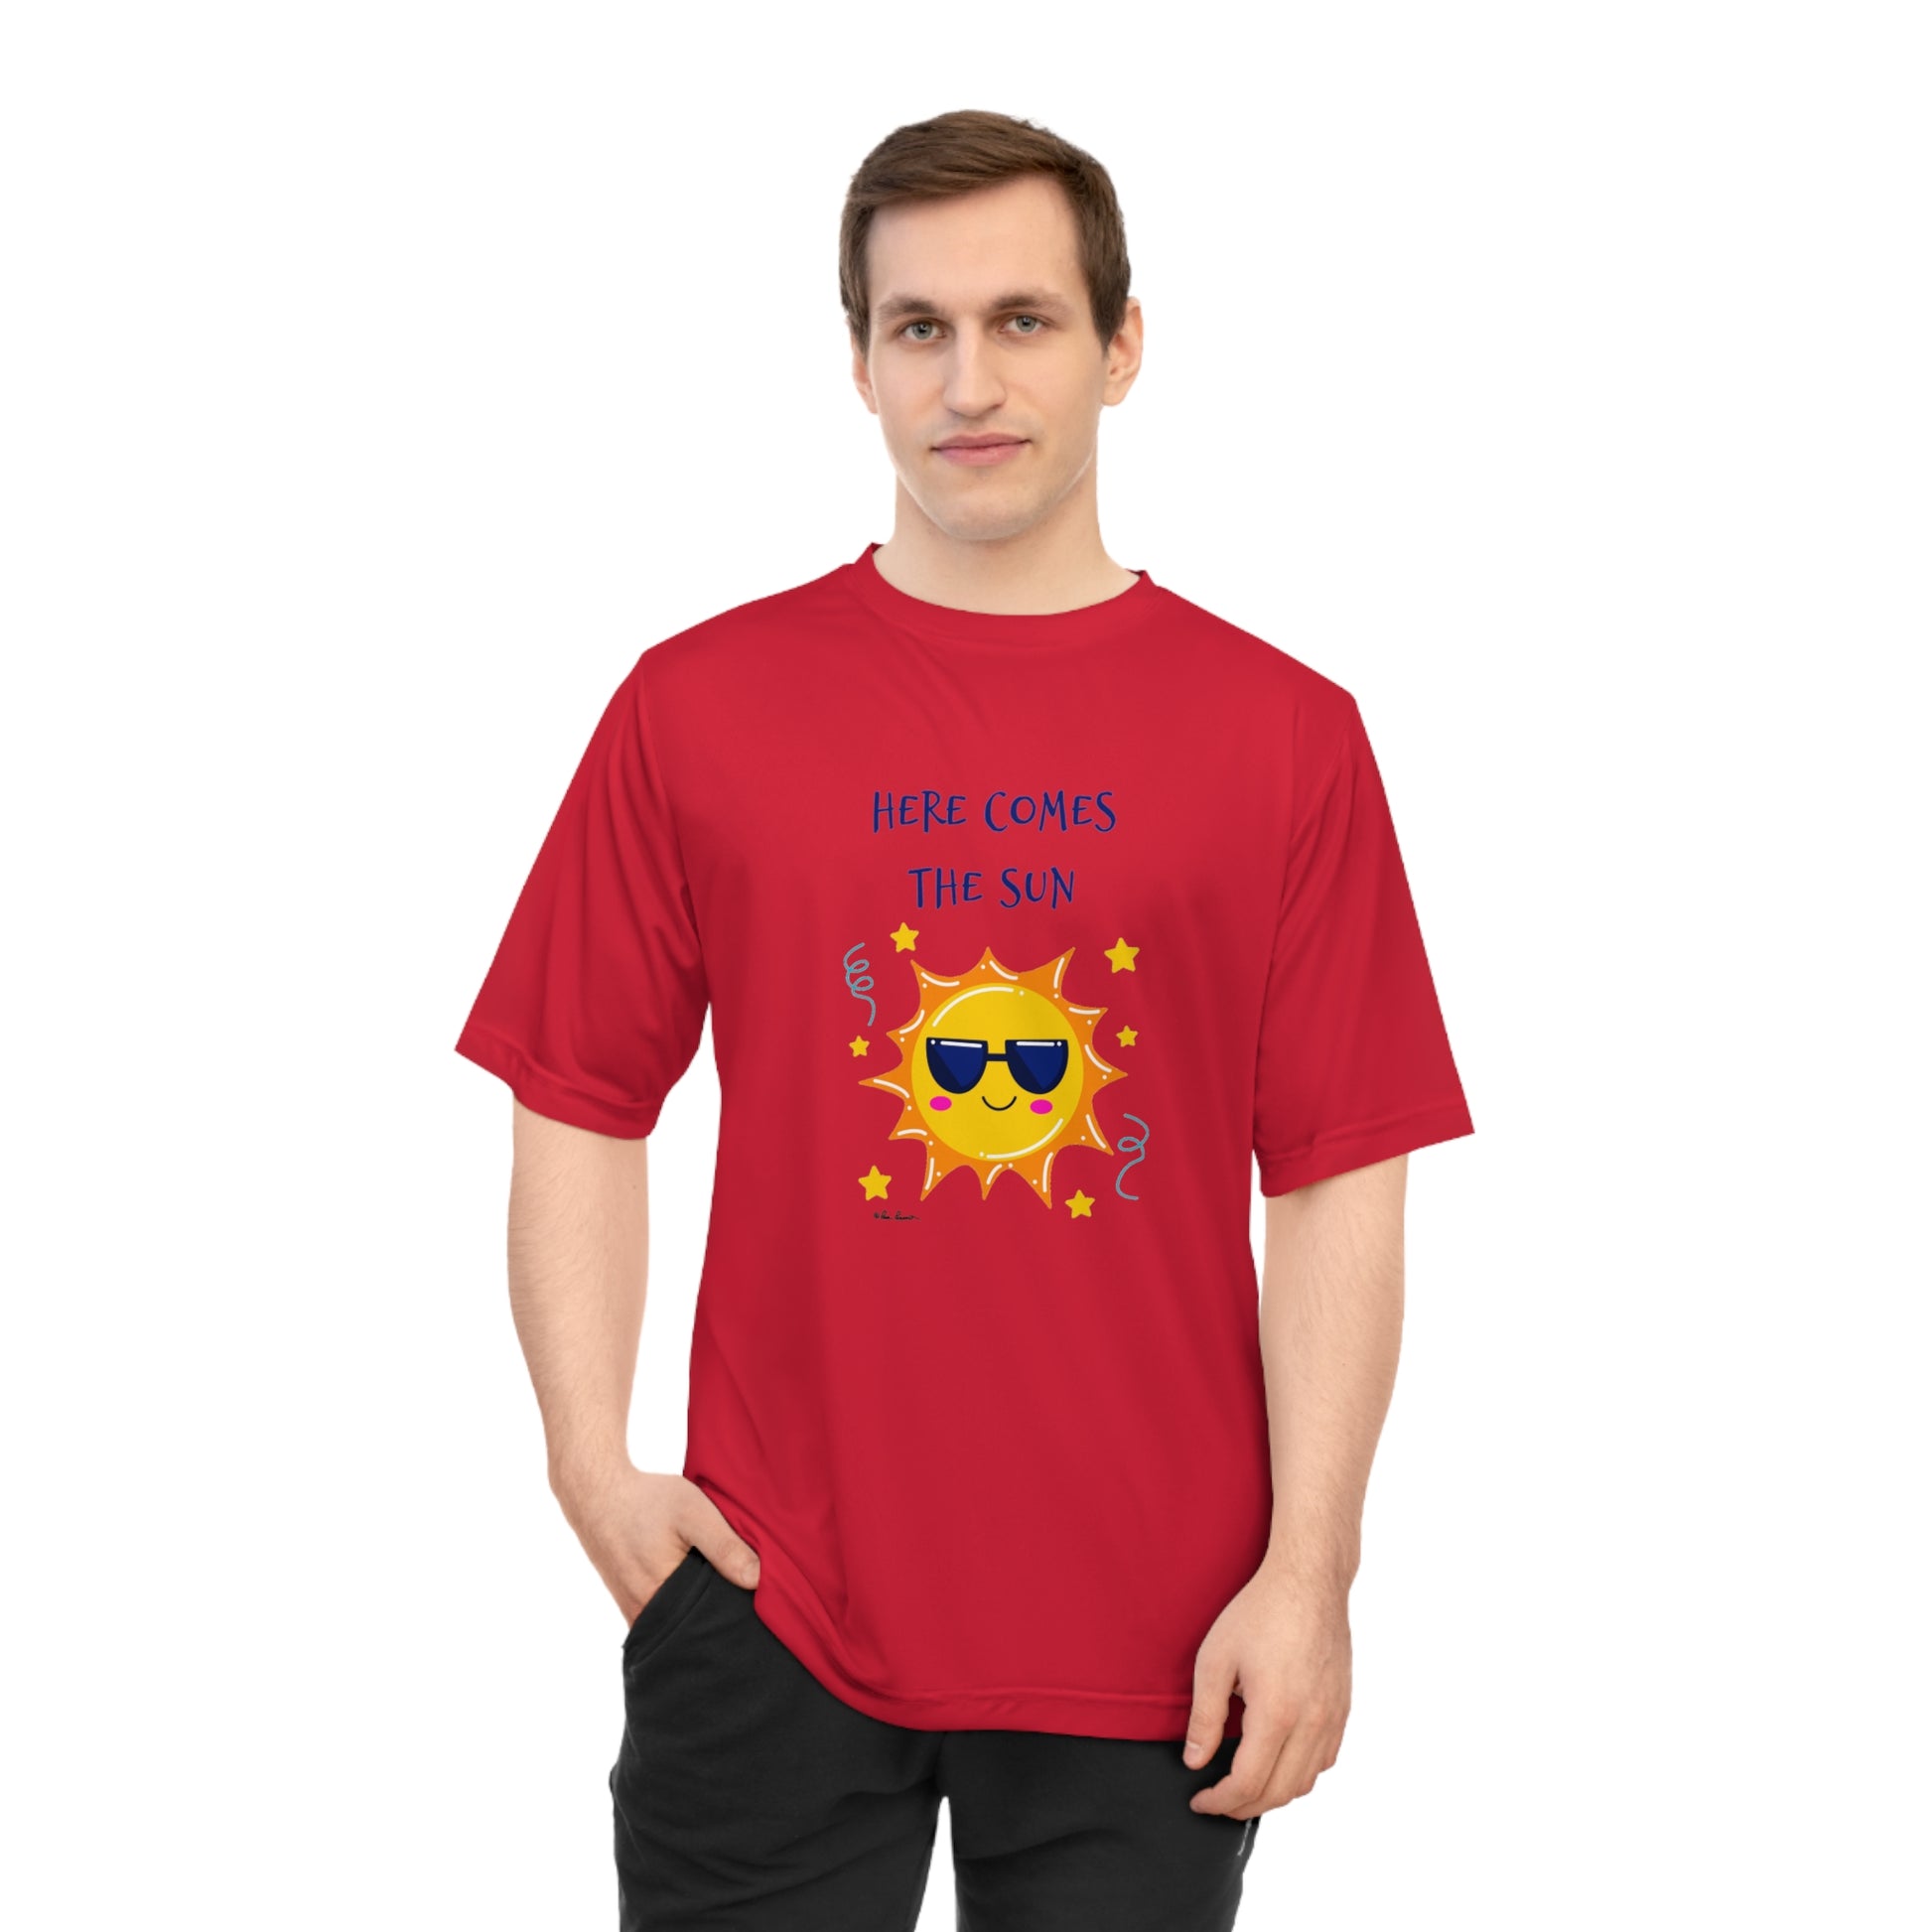 Mock up of a man wearing the Red shirt